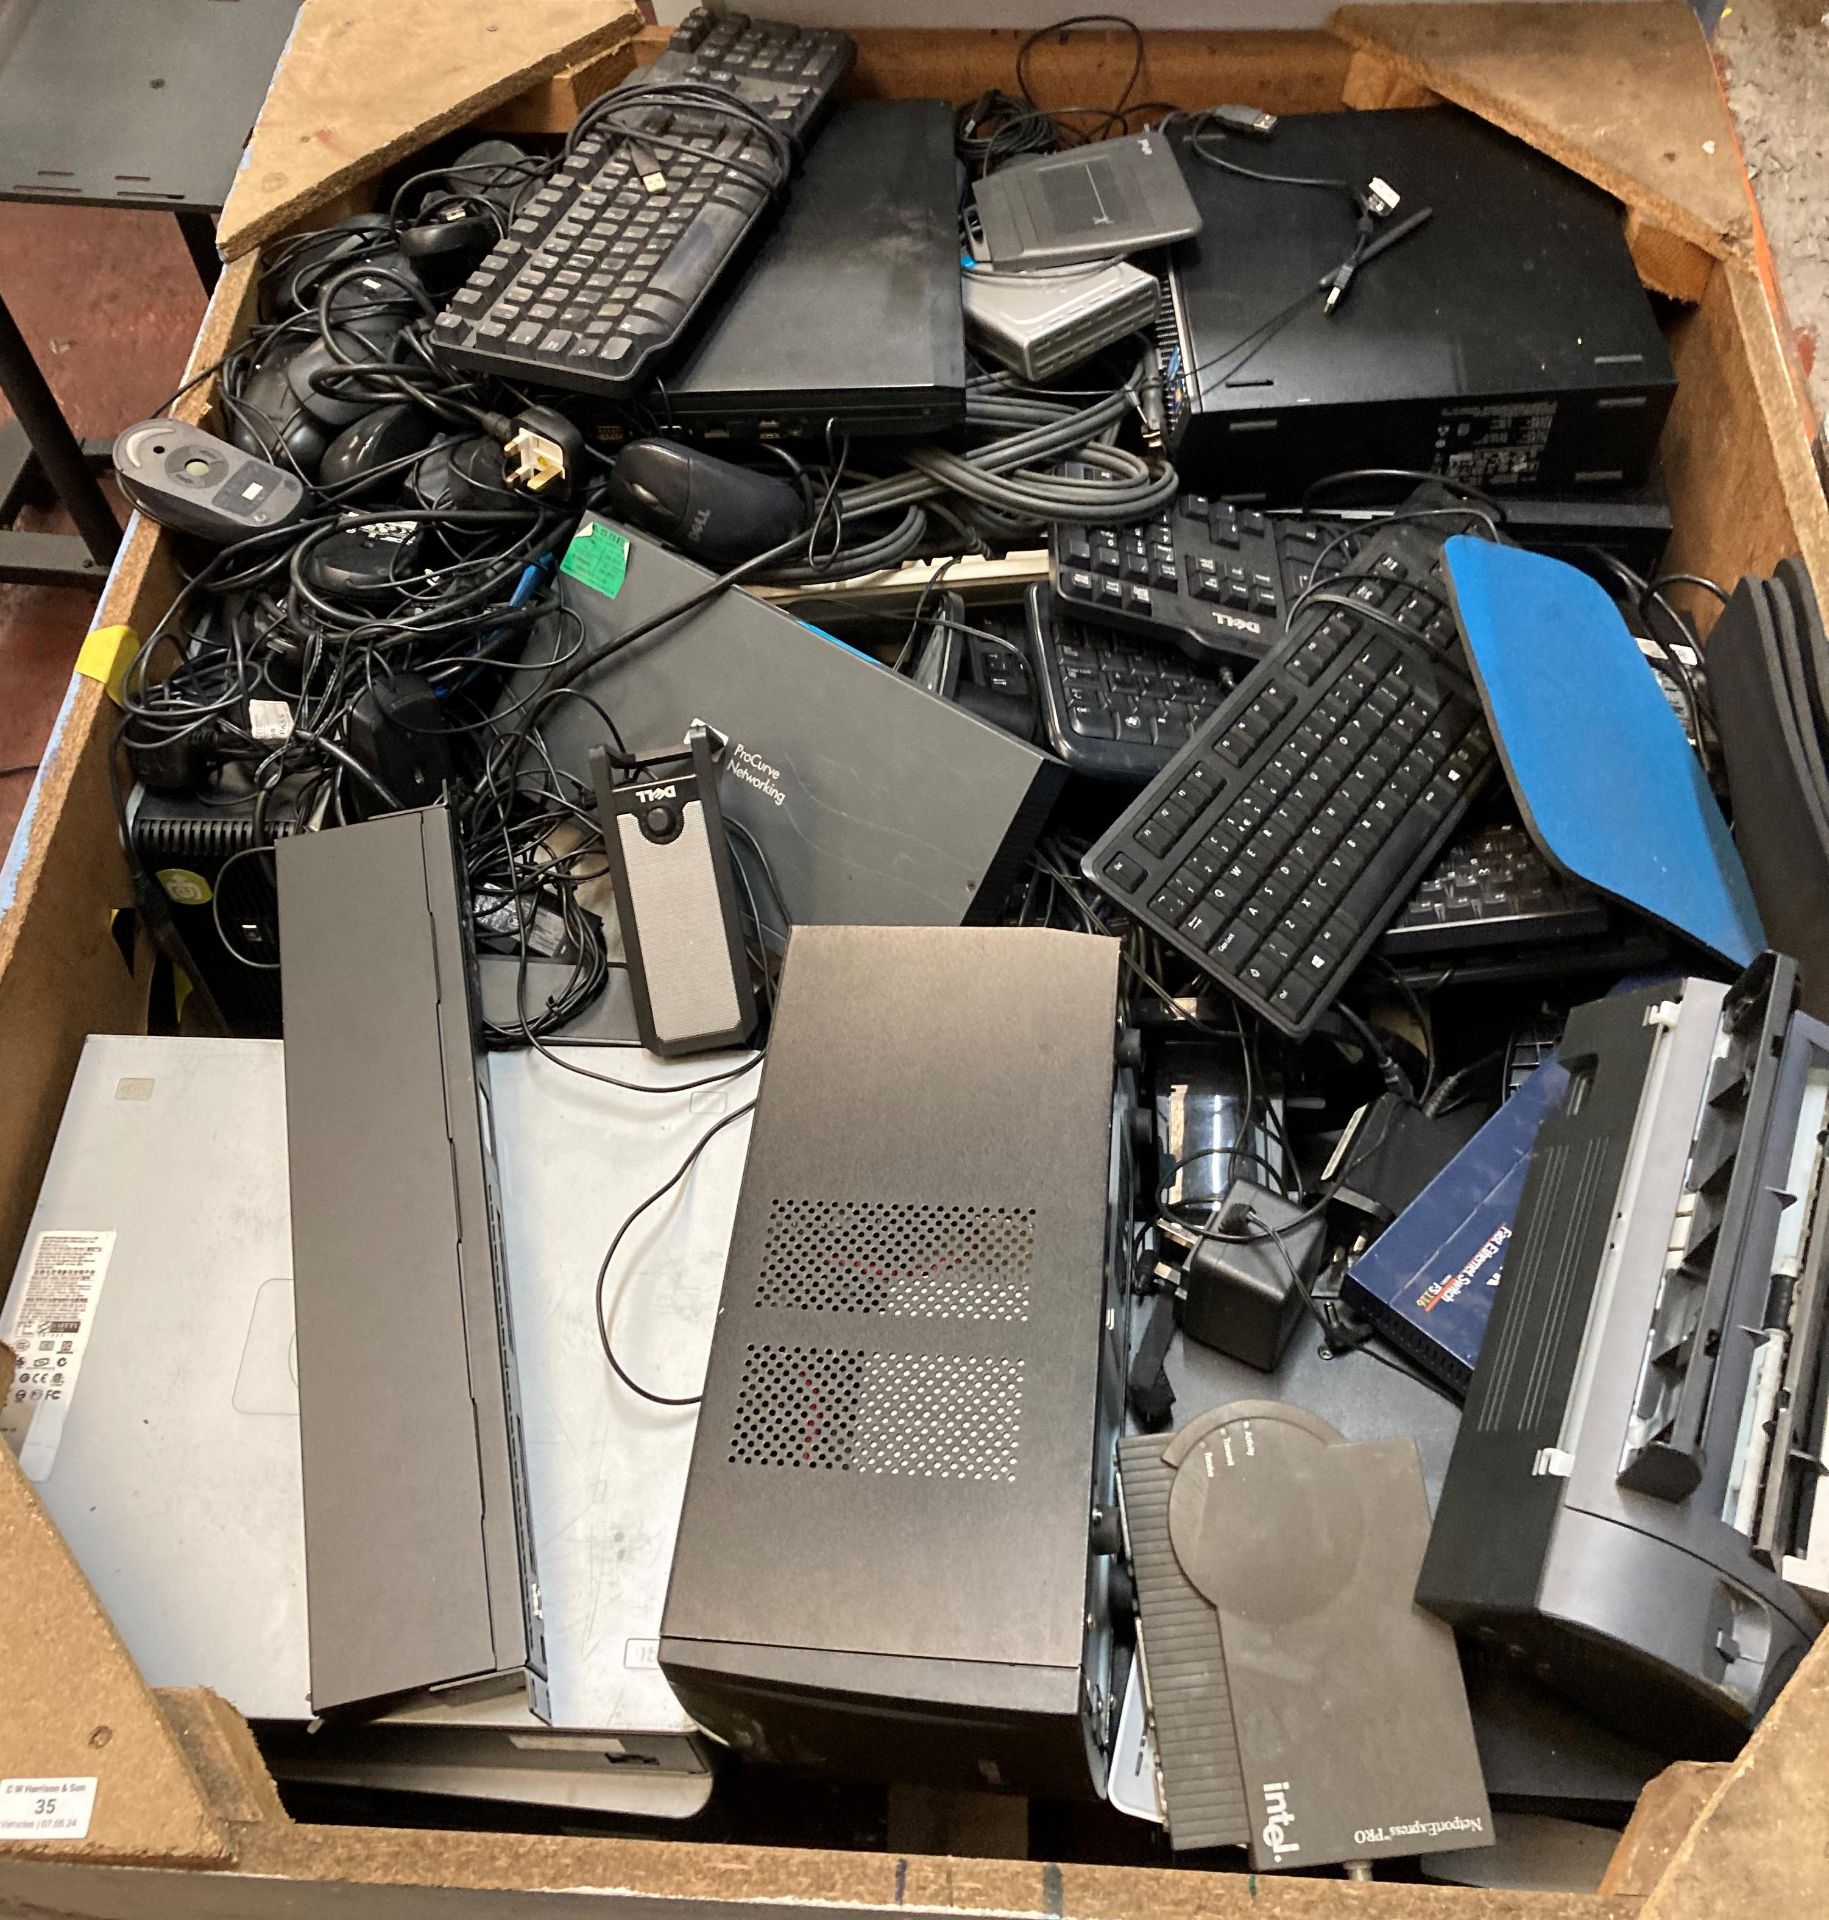 Contents to crate - large quantity of computer equipment including laptops (Lenovo, HP, etc),